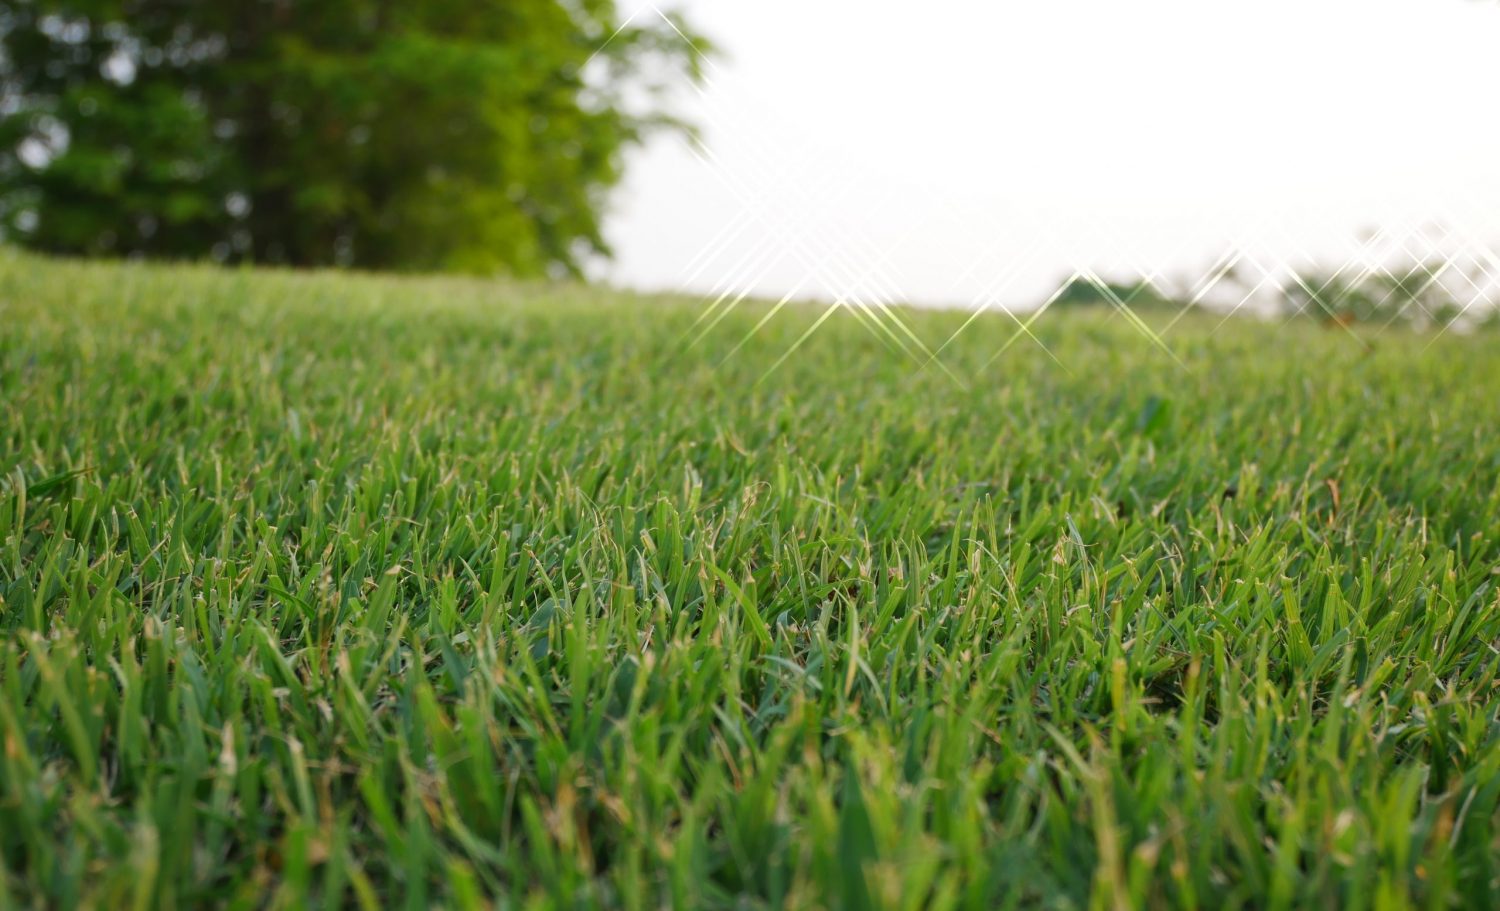 When Is The Best Time To Plant Grass In Texas